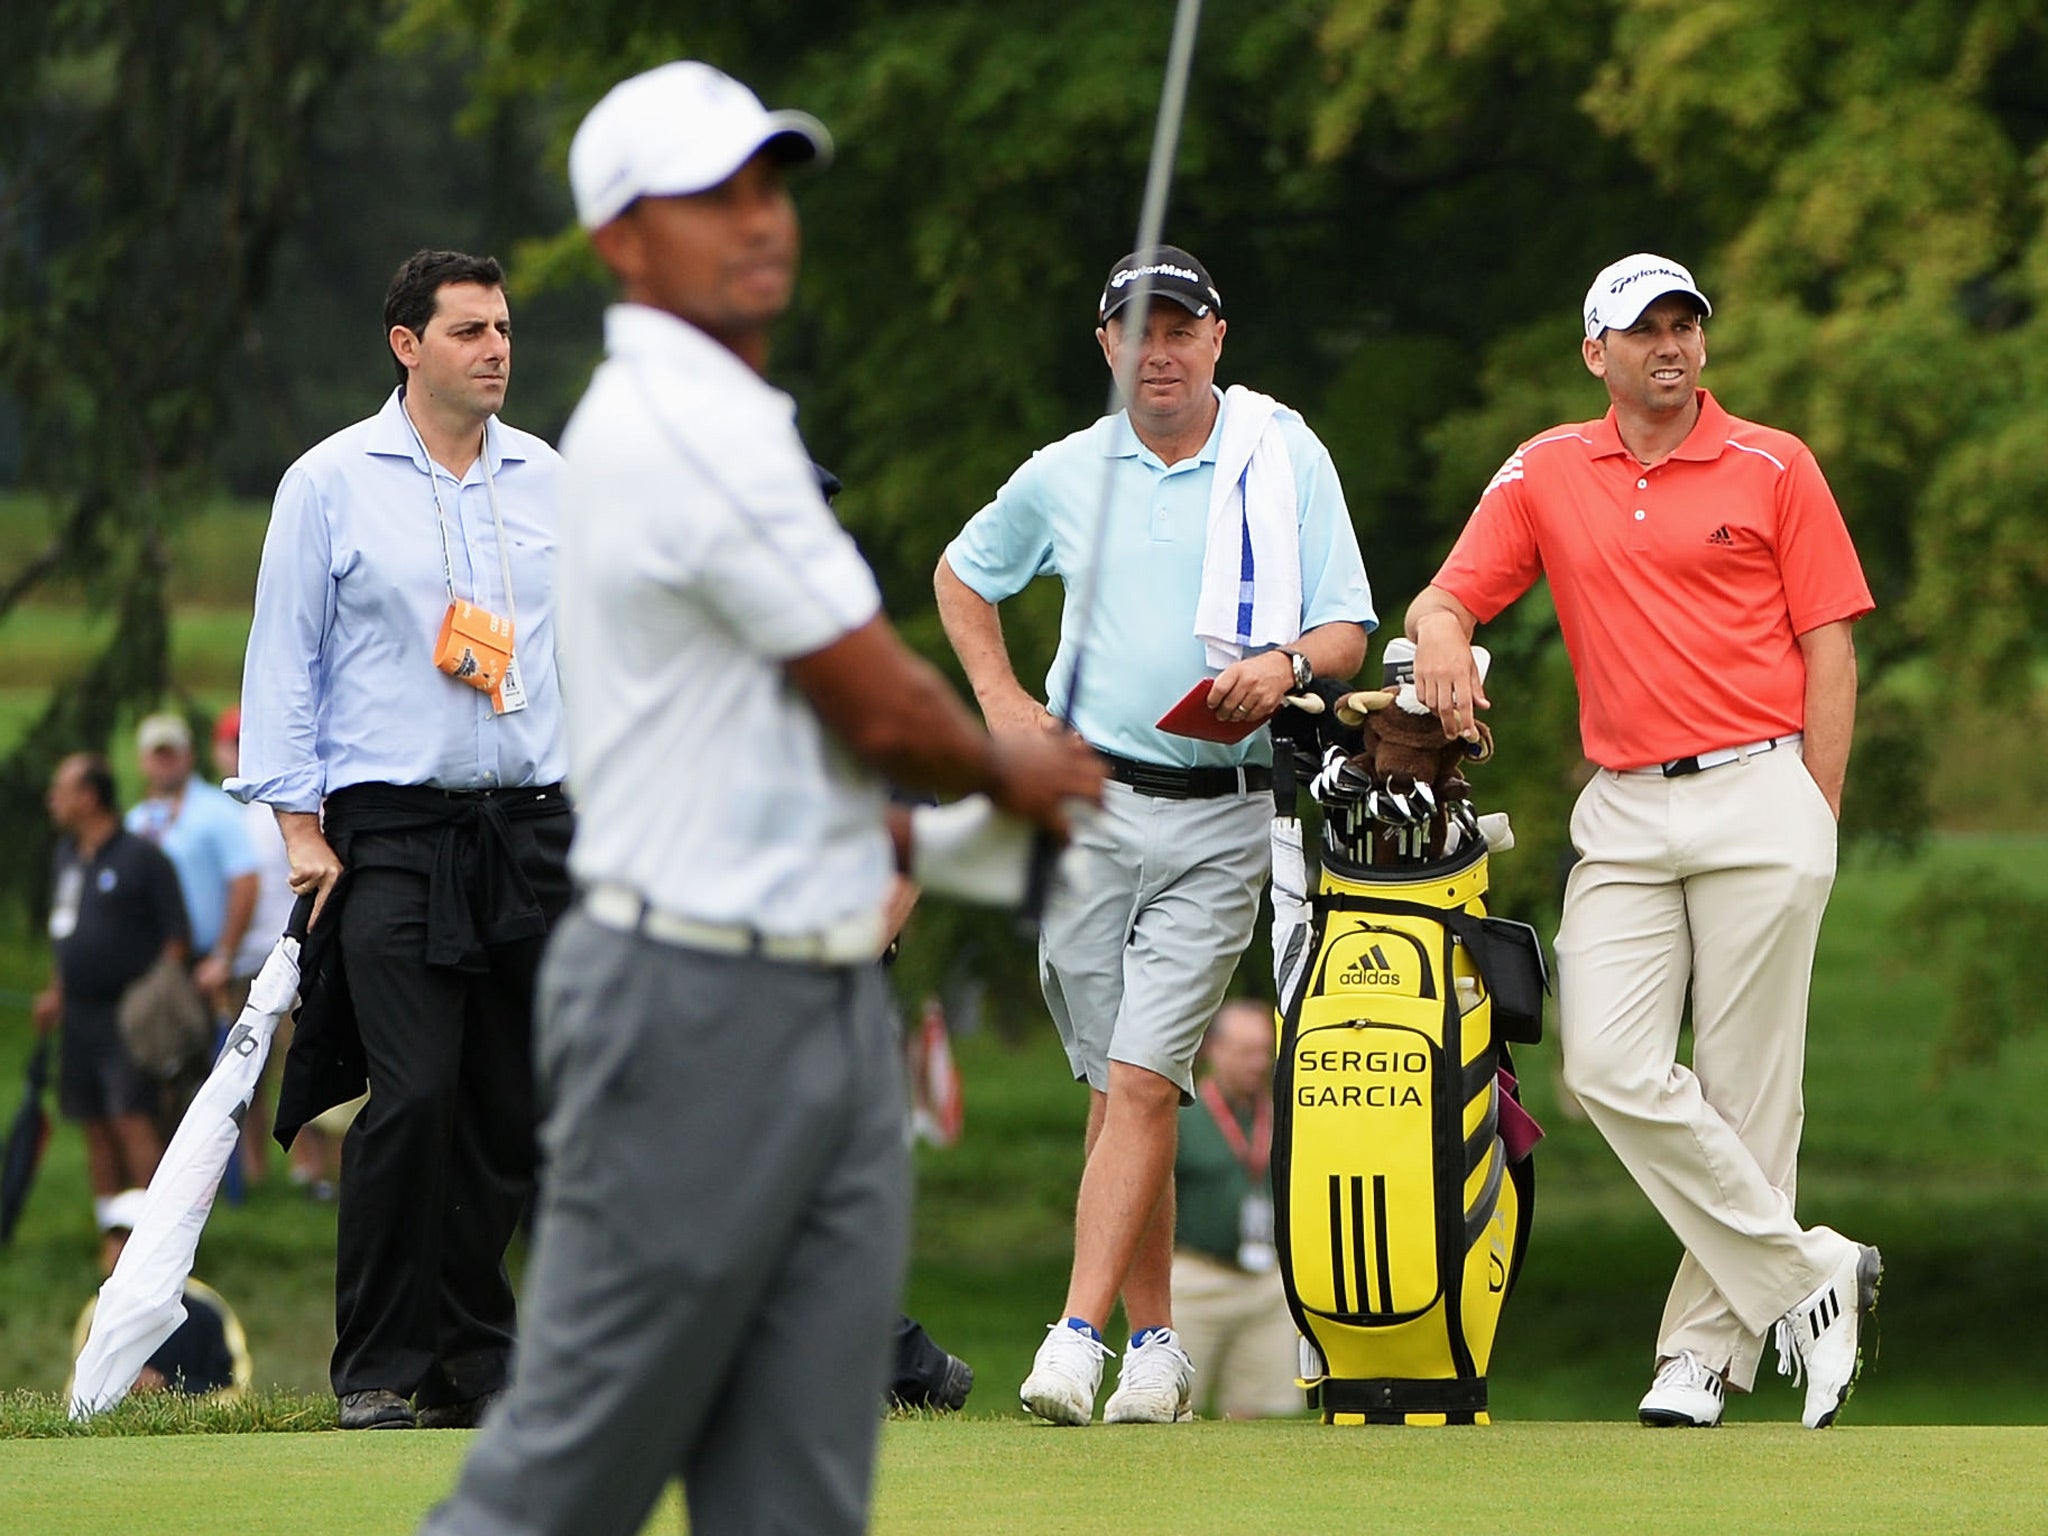 Sergio Garcia watches Tiger Woods at the driving range